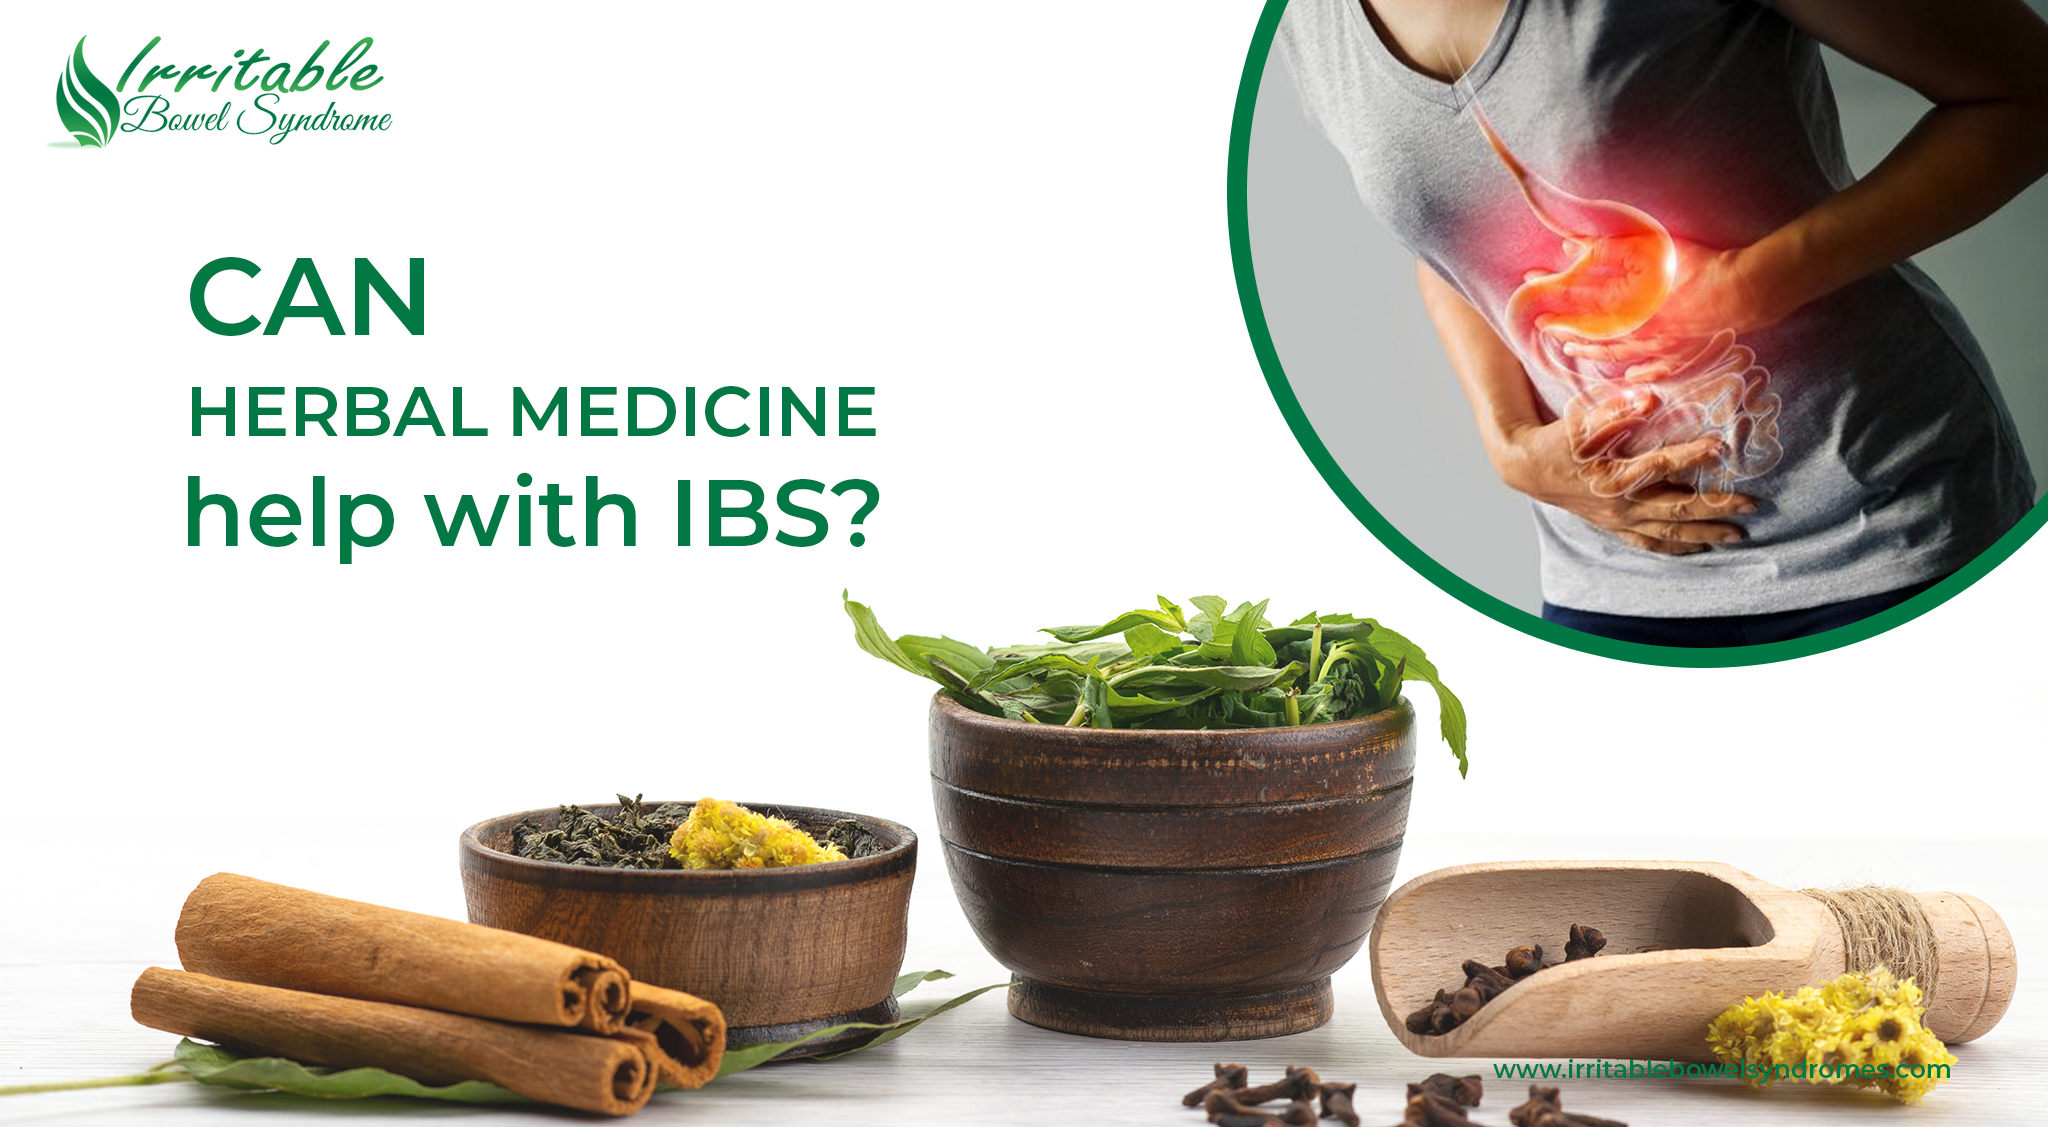 Can Herbal Medicine Help With IBS